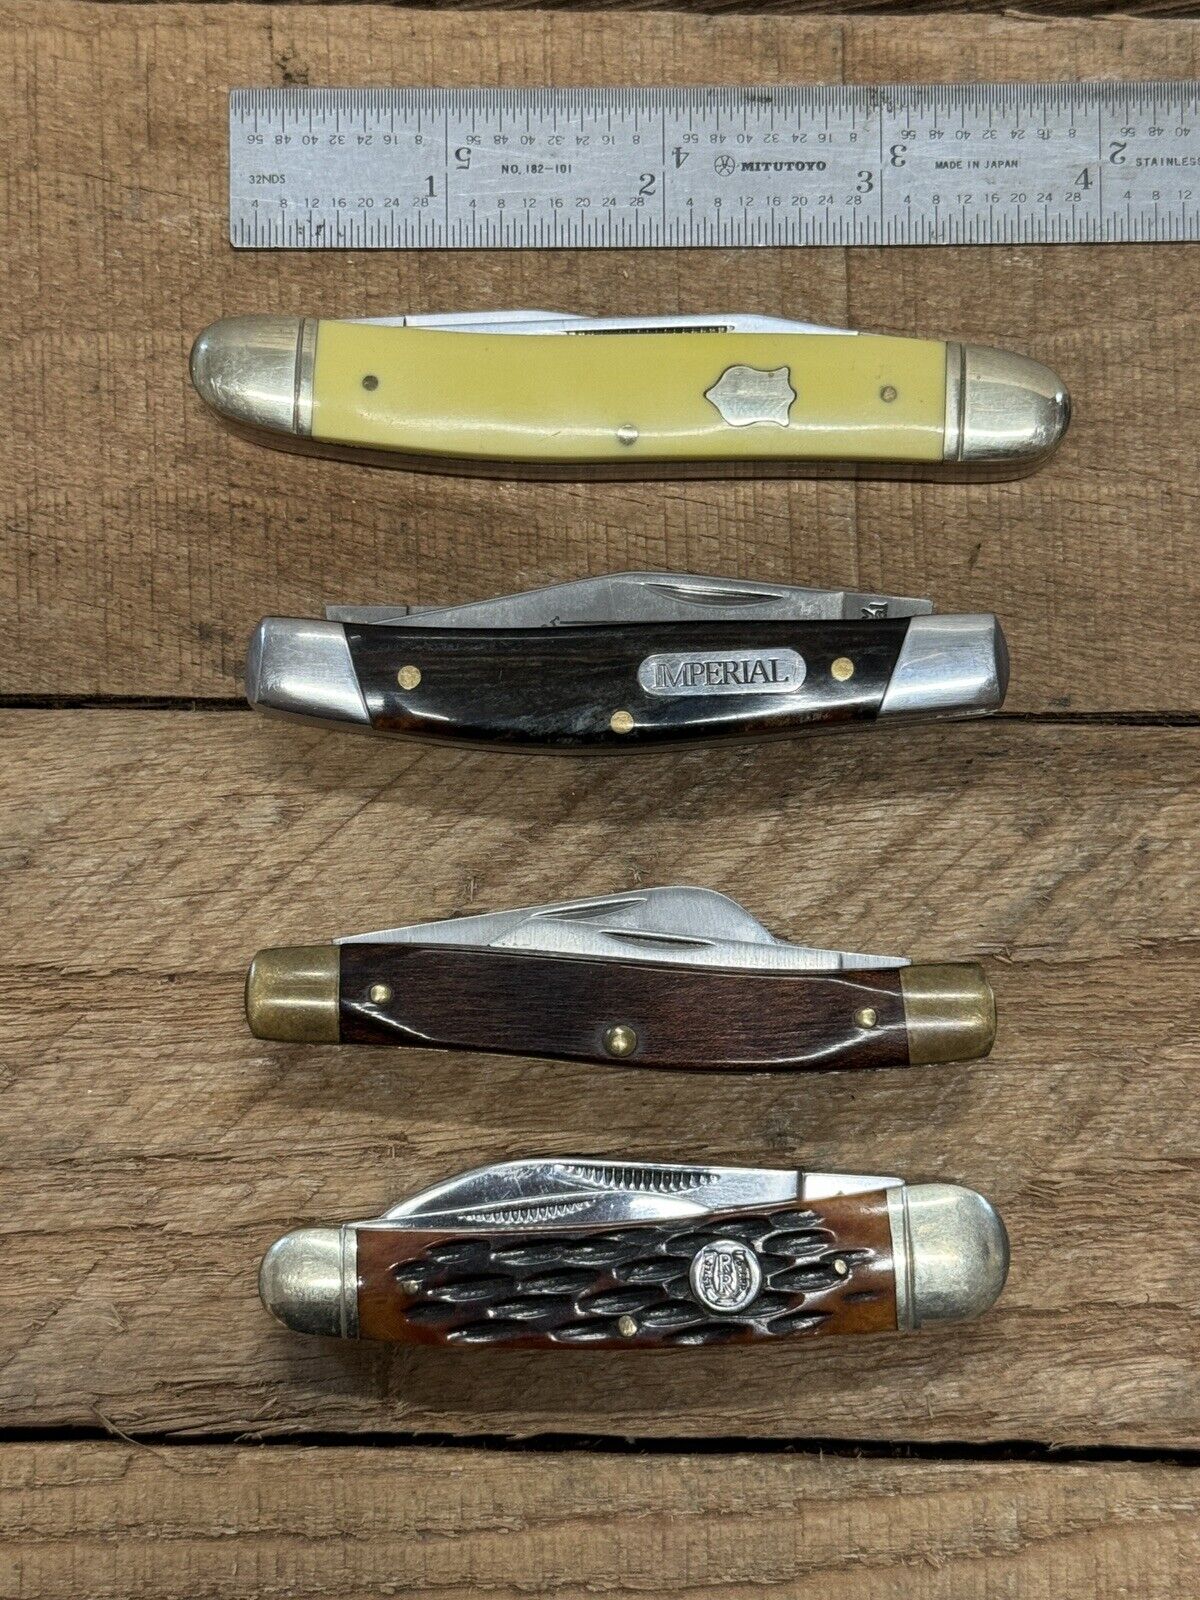 4 Pocket Knives Stockman Imperial Schrade Frontier Rough Rider Nice Shape